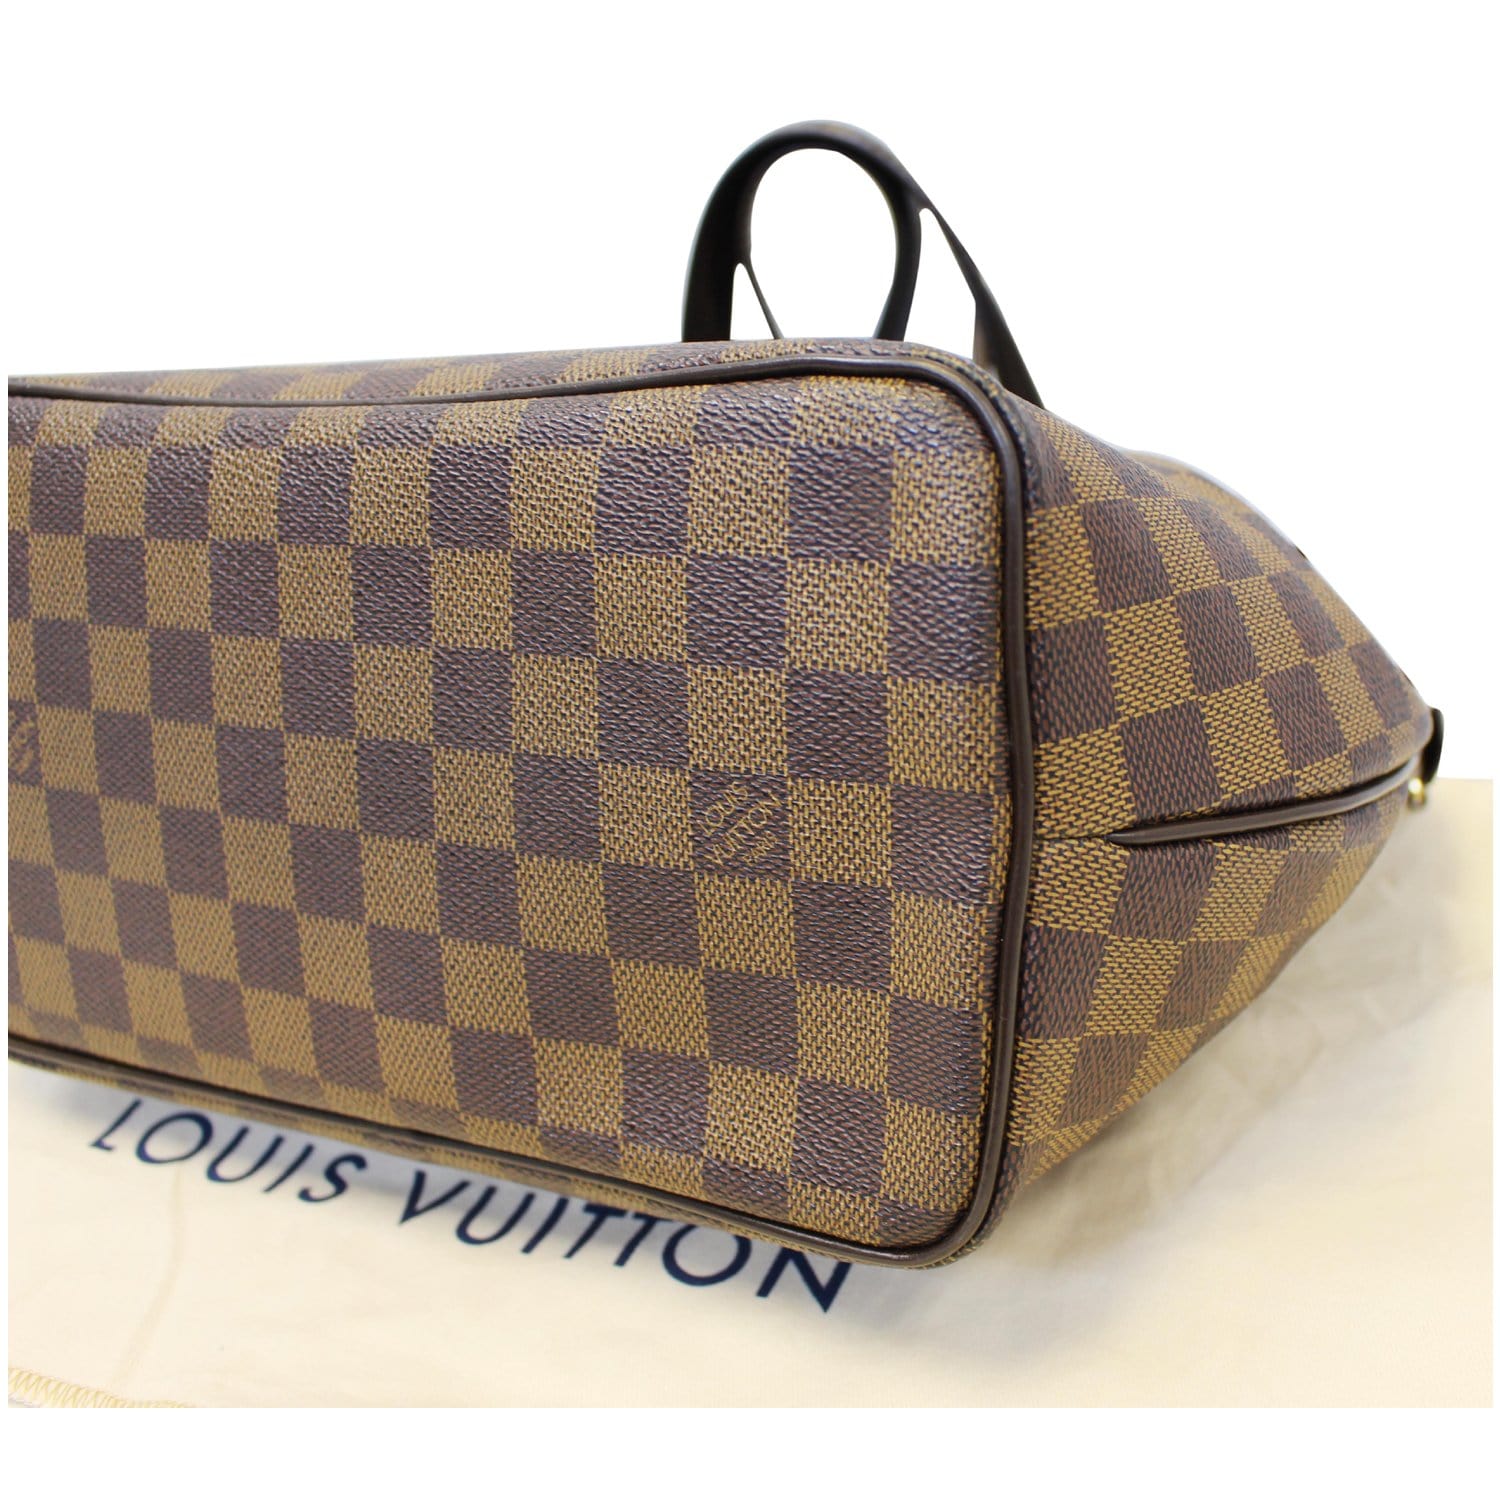 Louis Vuitton Westminster PM Women's Tote Bag N41102() Damier Ebene Brown  Red